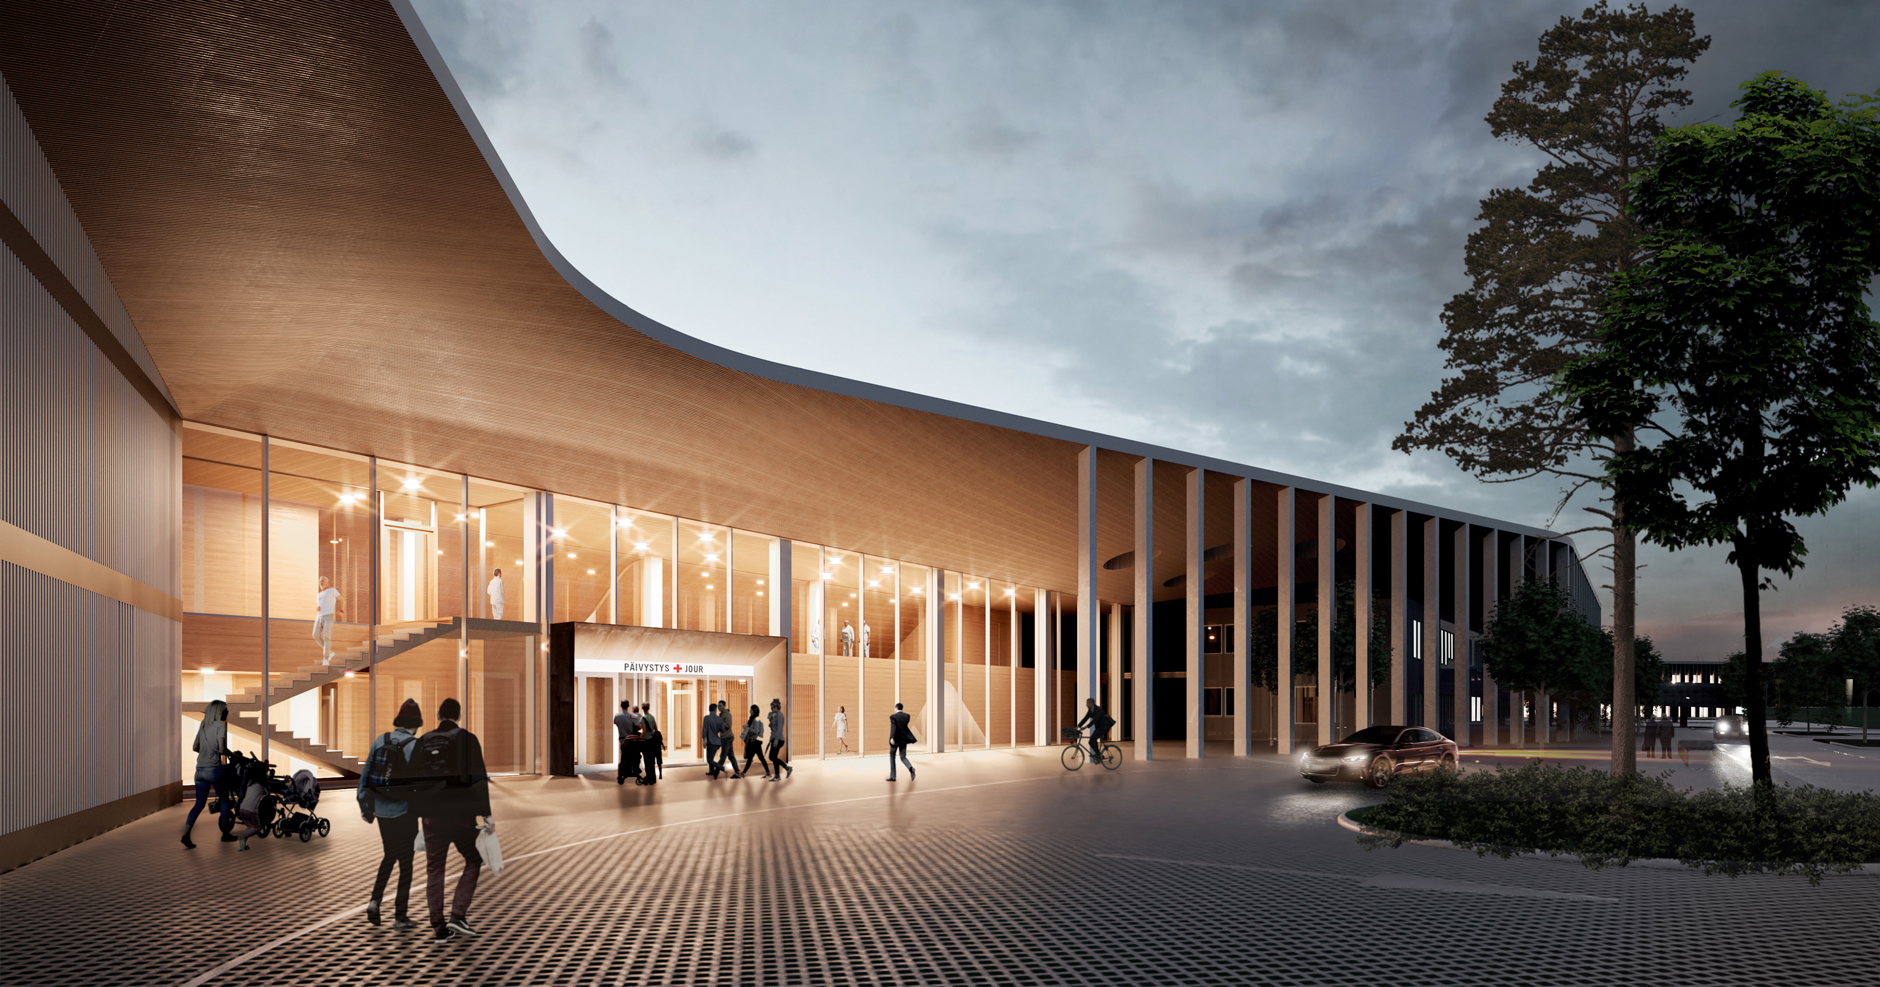 Exterior and the entrance visualization of the Lapland Central Hospital designed by Verstas Architects